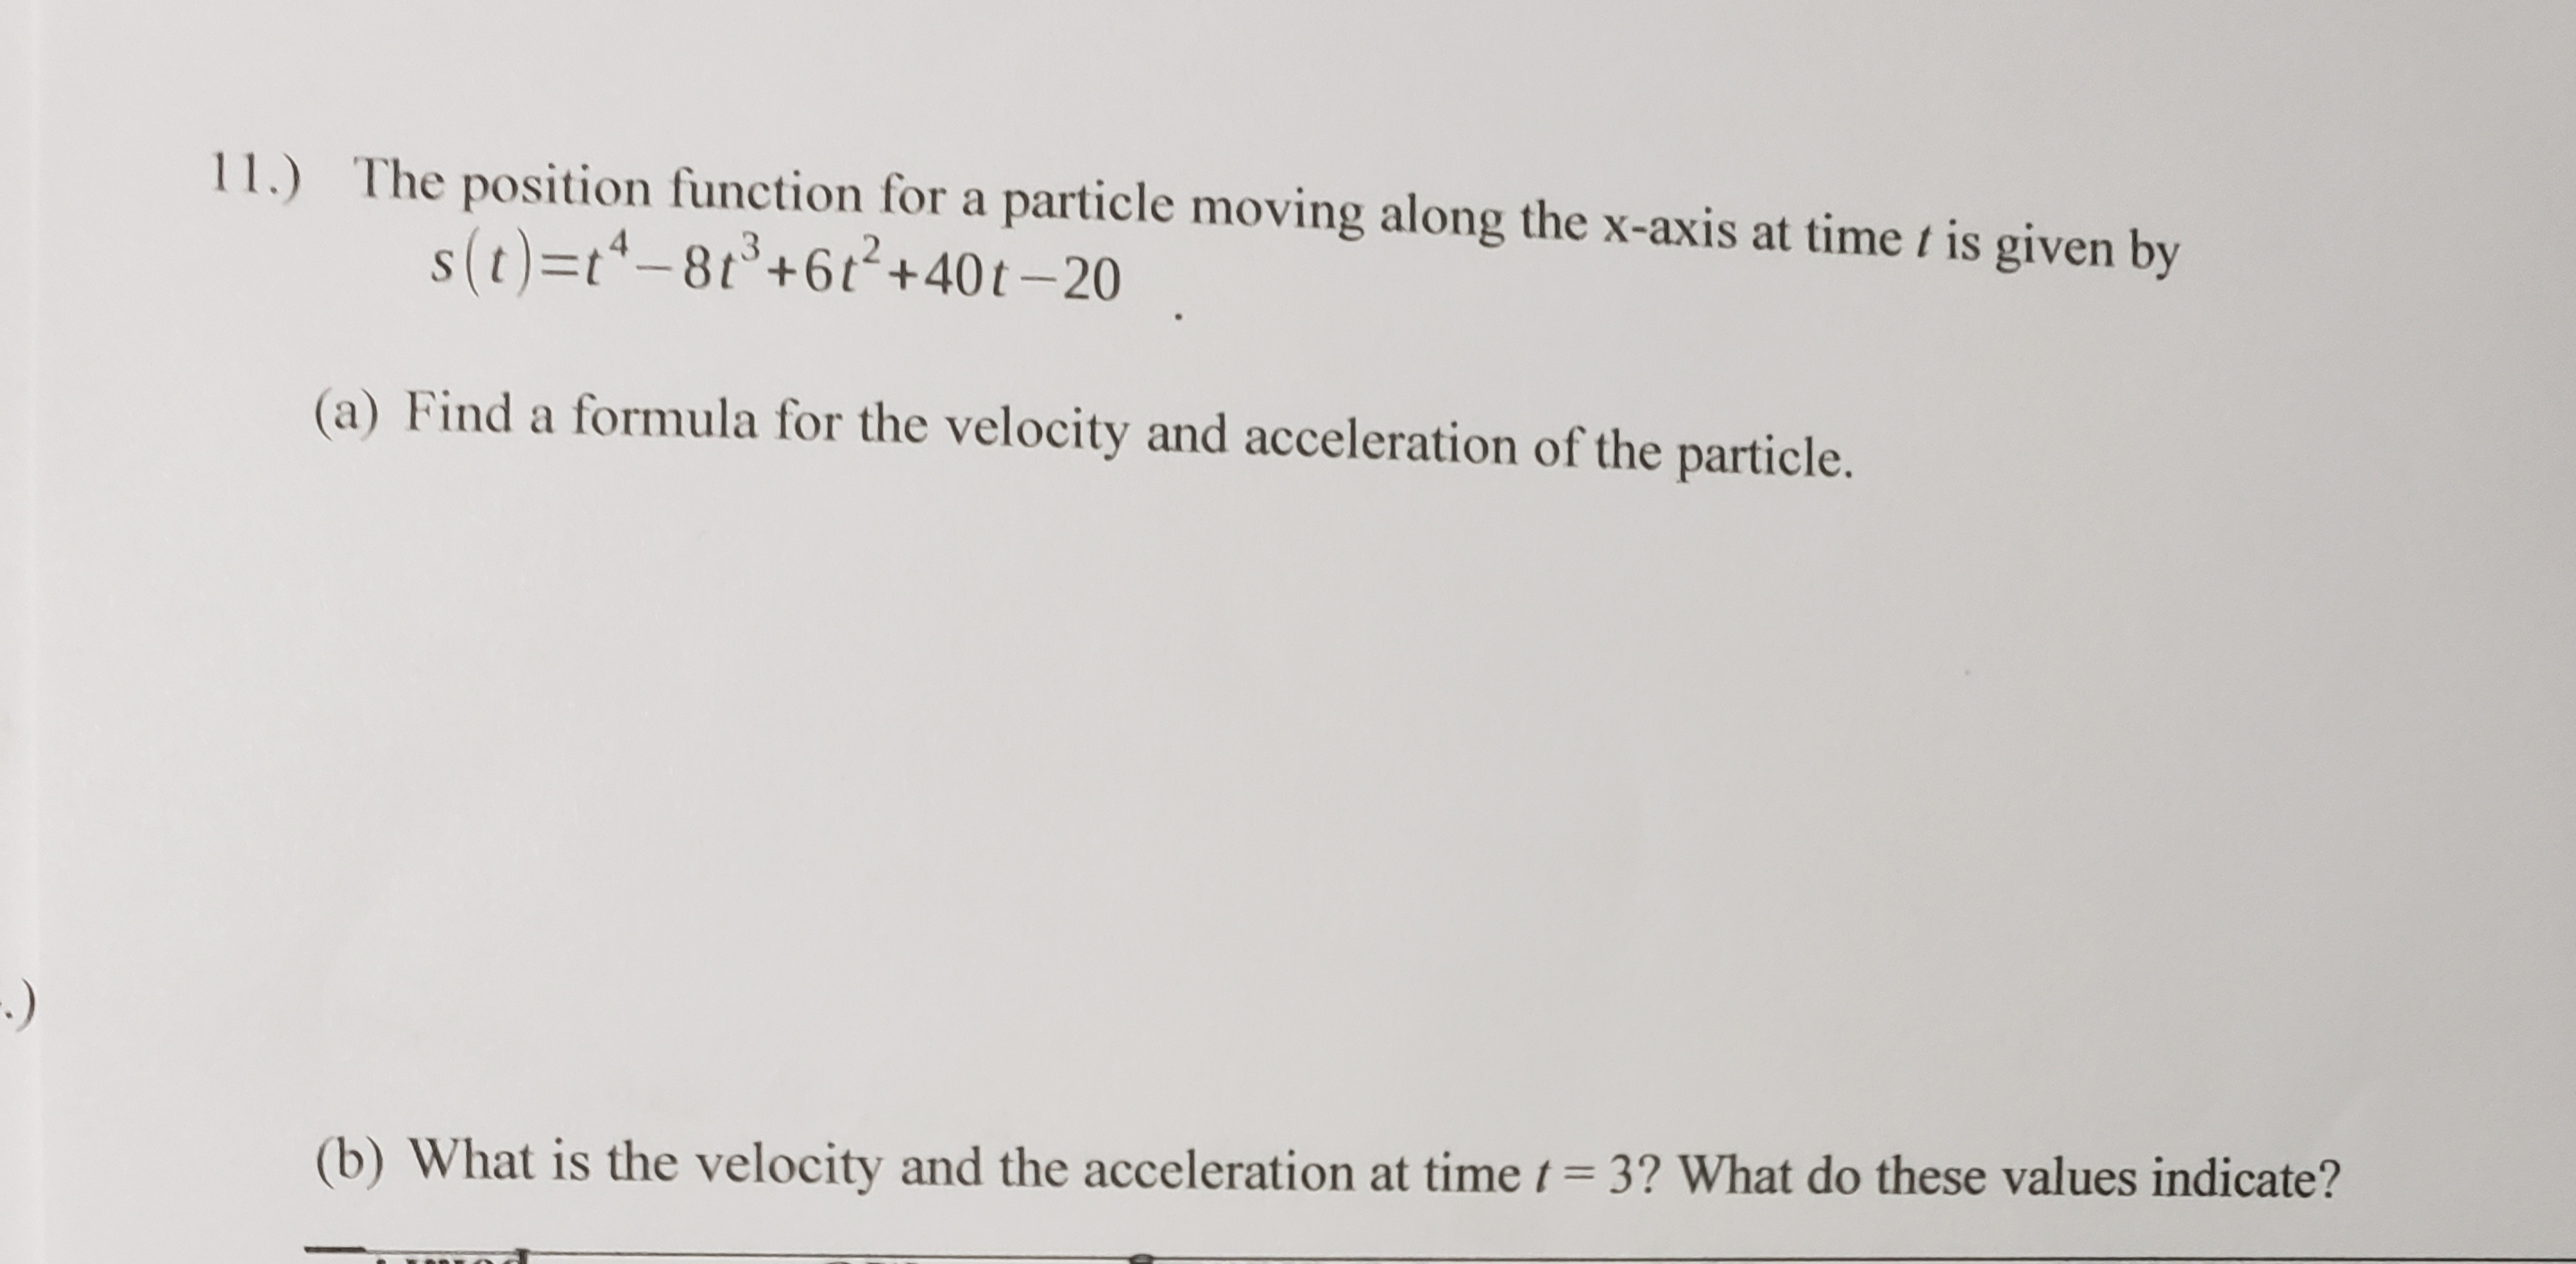 11.) The position function for a particle moving along the x-axis at time t is given by
s(t)=t*-81+6t²+40t–20
(a) Find a formula for the velocity and acceleration of the particle.
:)
(b) What is the velocity and the acceleration at time t= 3? What do these values indicate?
